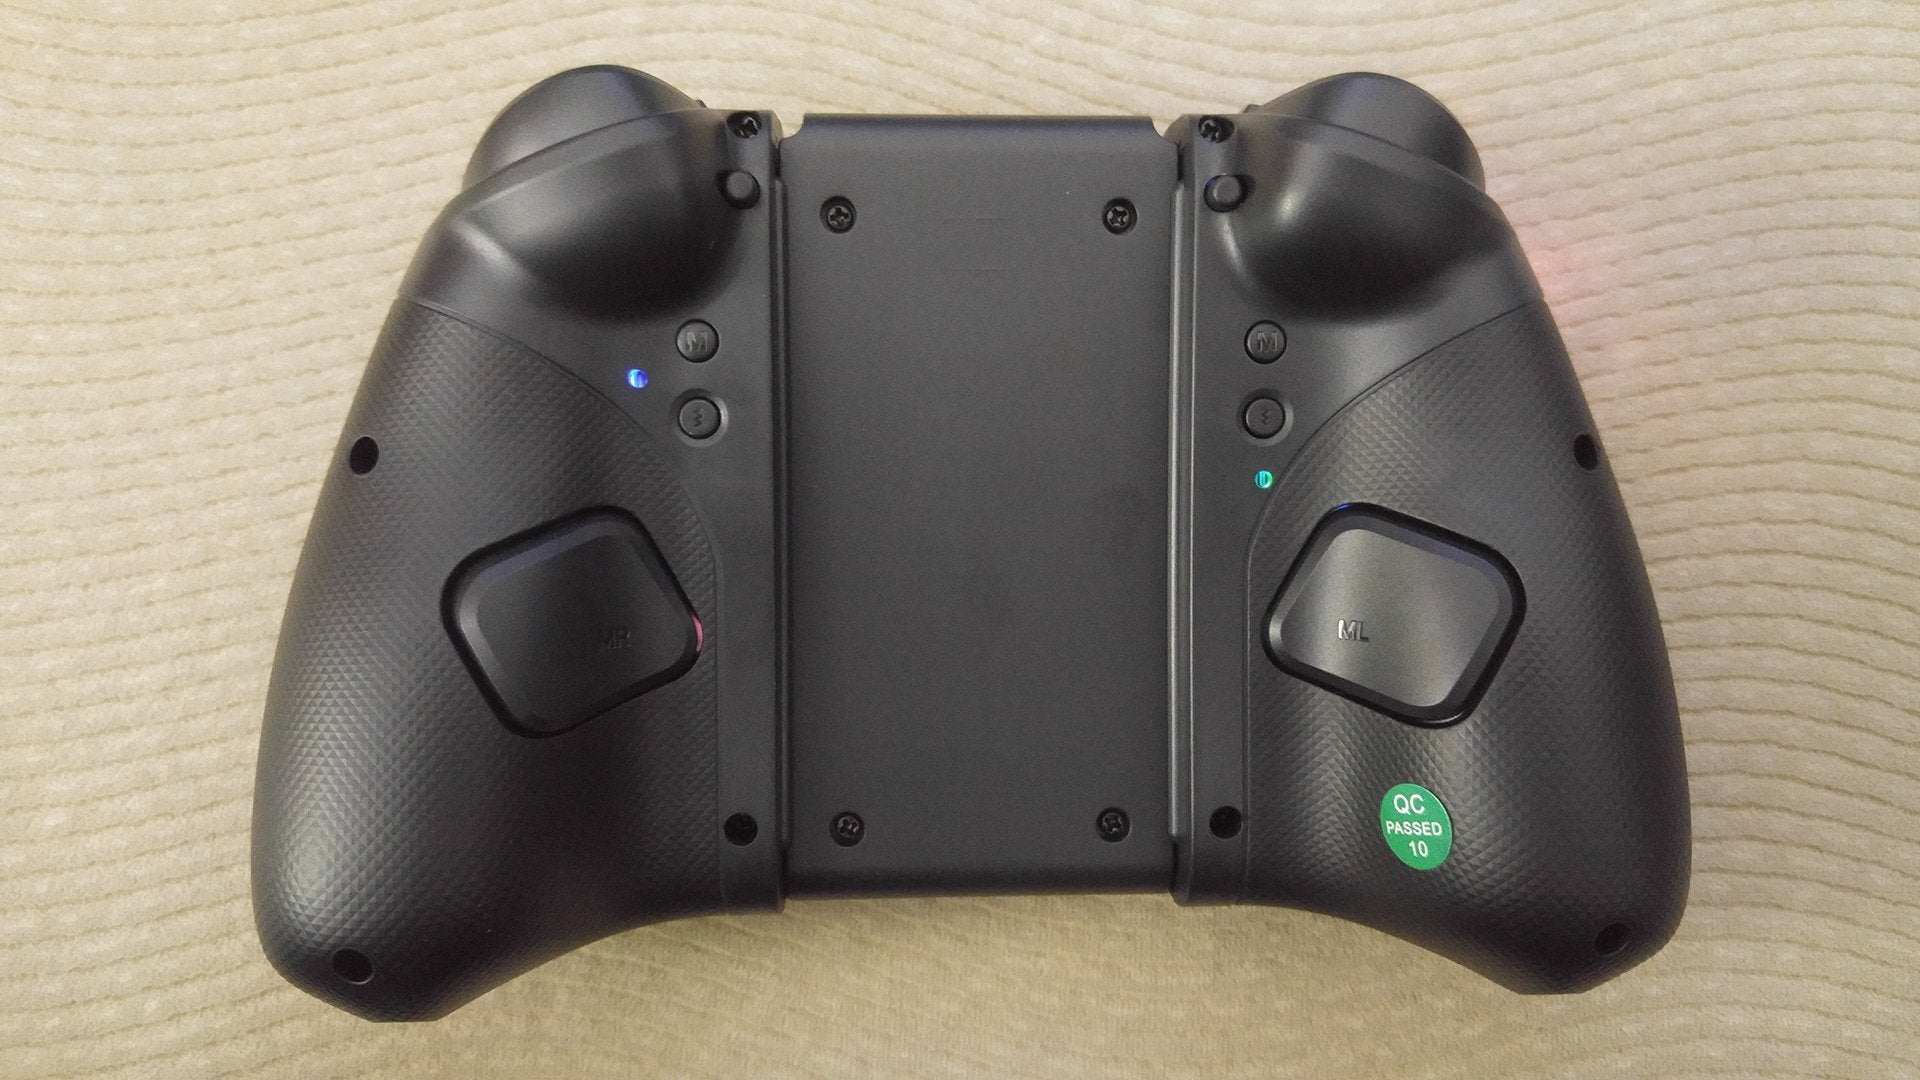 The back of the Stellar T5 controller showing he Macro buttons, Macro input buttons, and Vibration setting buttons.